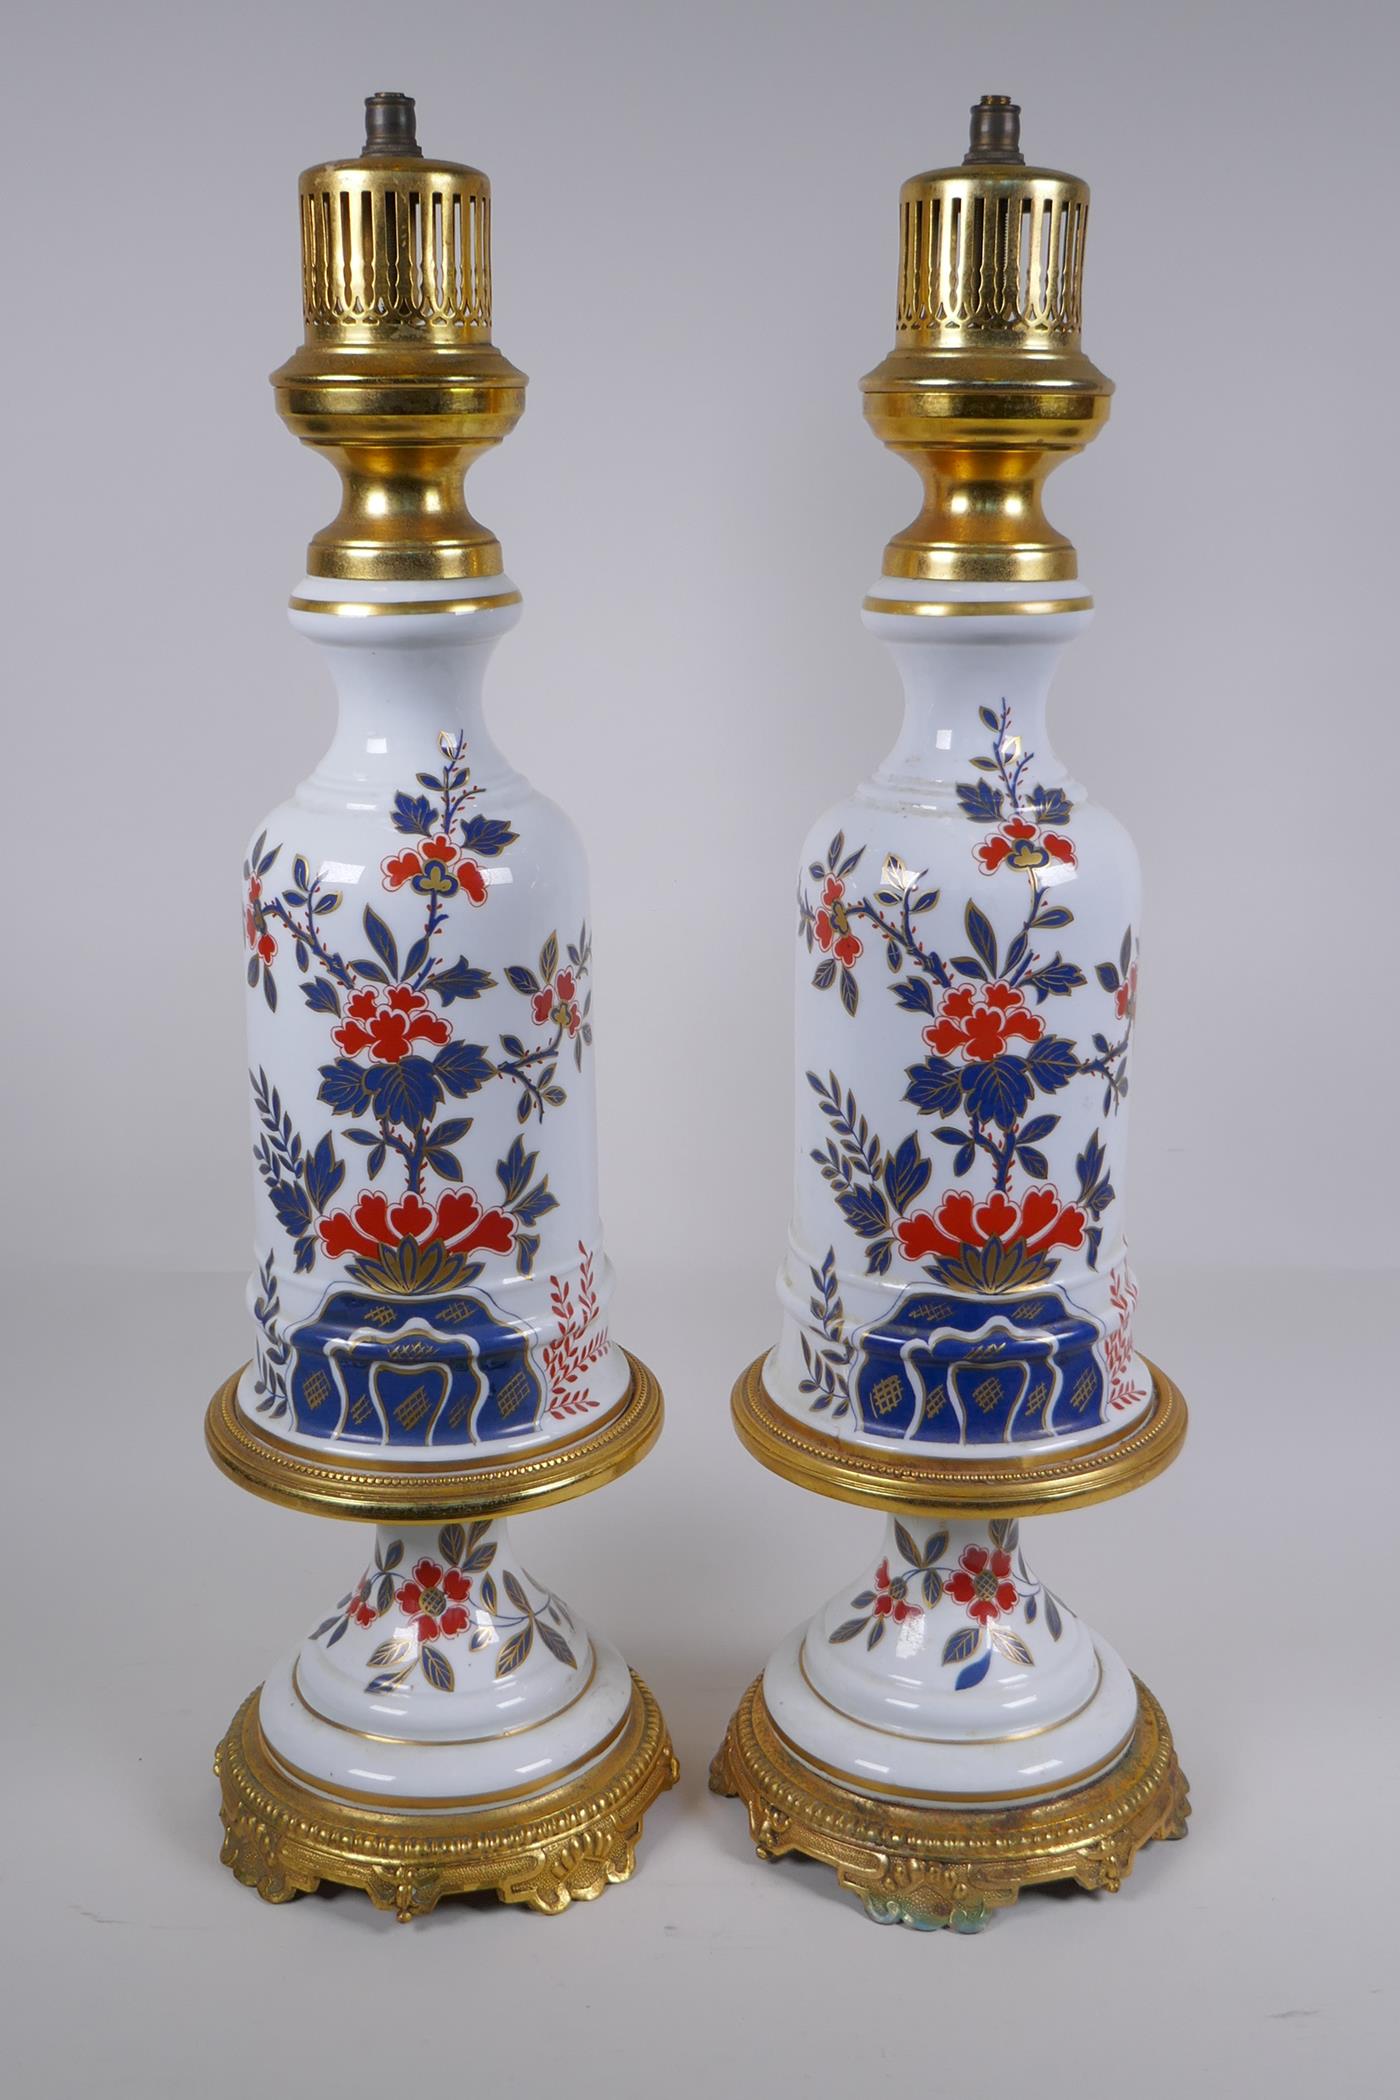 A pair of ormolu and porcelain lamp bases with Imari style decoration, 59cm high